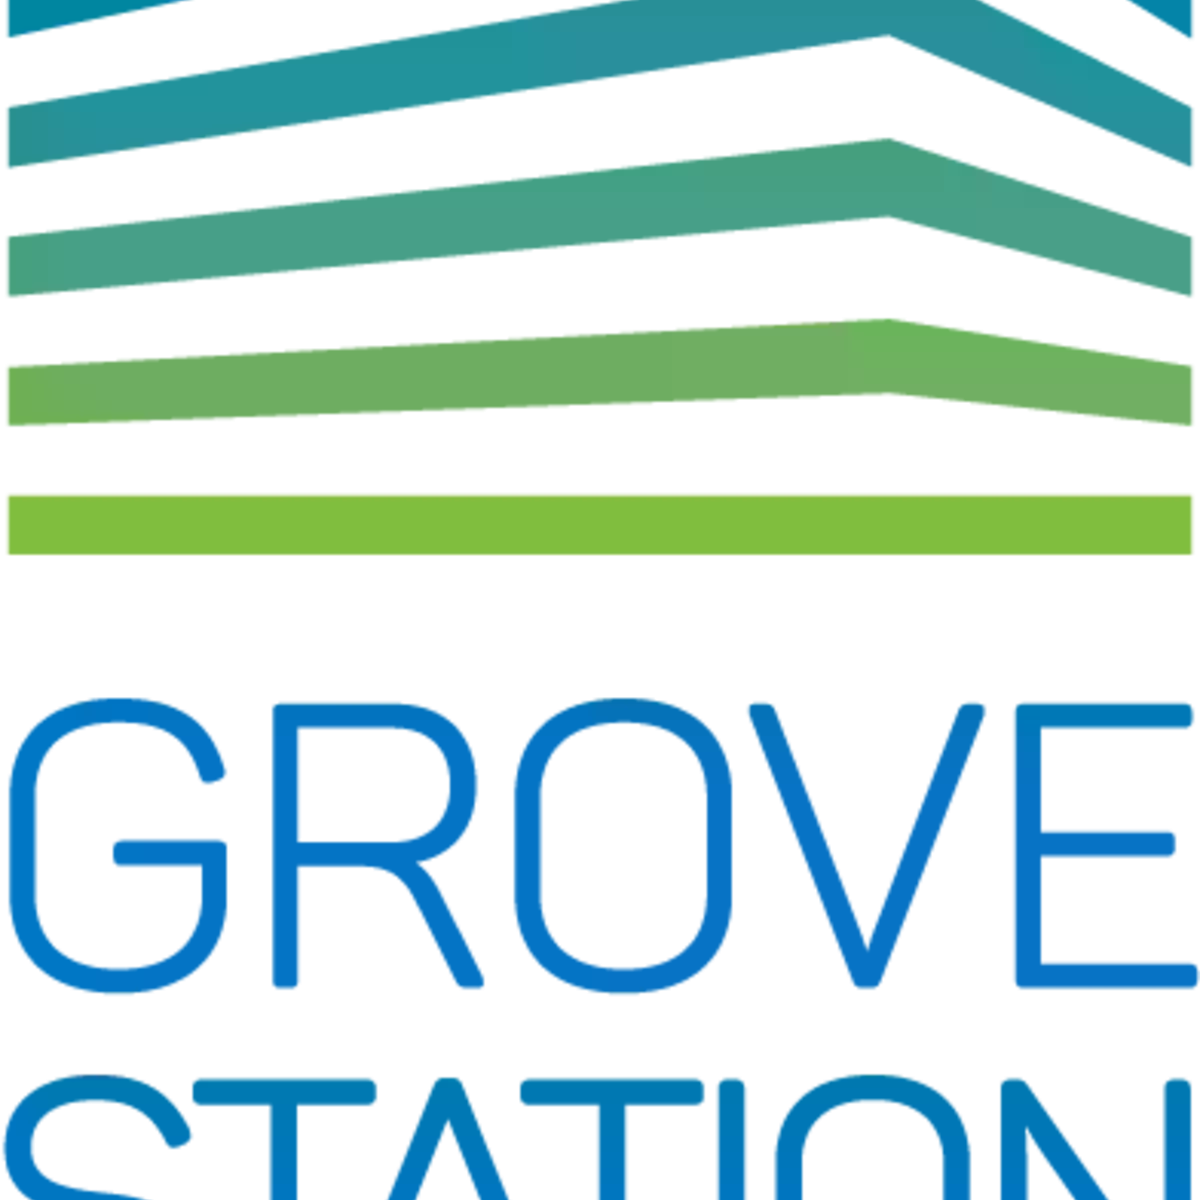 Grove Station Tower